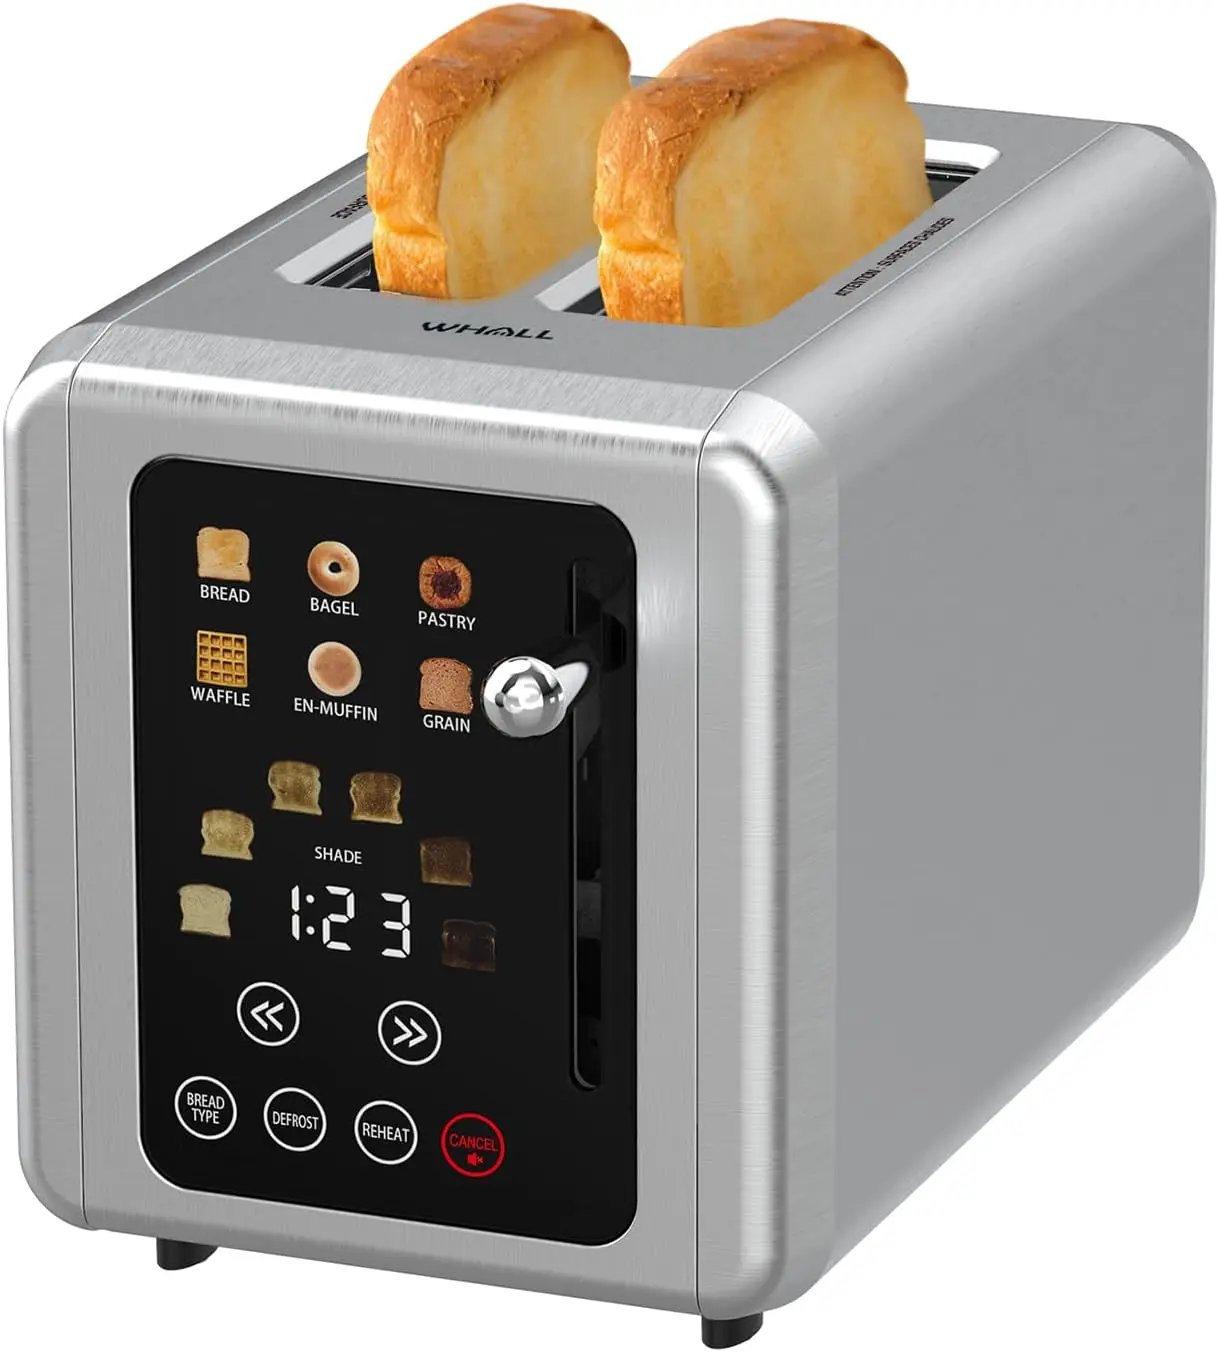 https://ae01.alicdn.com/kf/S48d4fffe2da44d389f9814e124c5a577V/WHALL-Touch-screen-Toaster-2-slice-Stainless-Steel-Digital-Timer-Toaster-with-Sound-Function-Smart-Extra.jpg